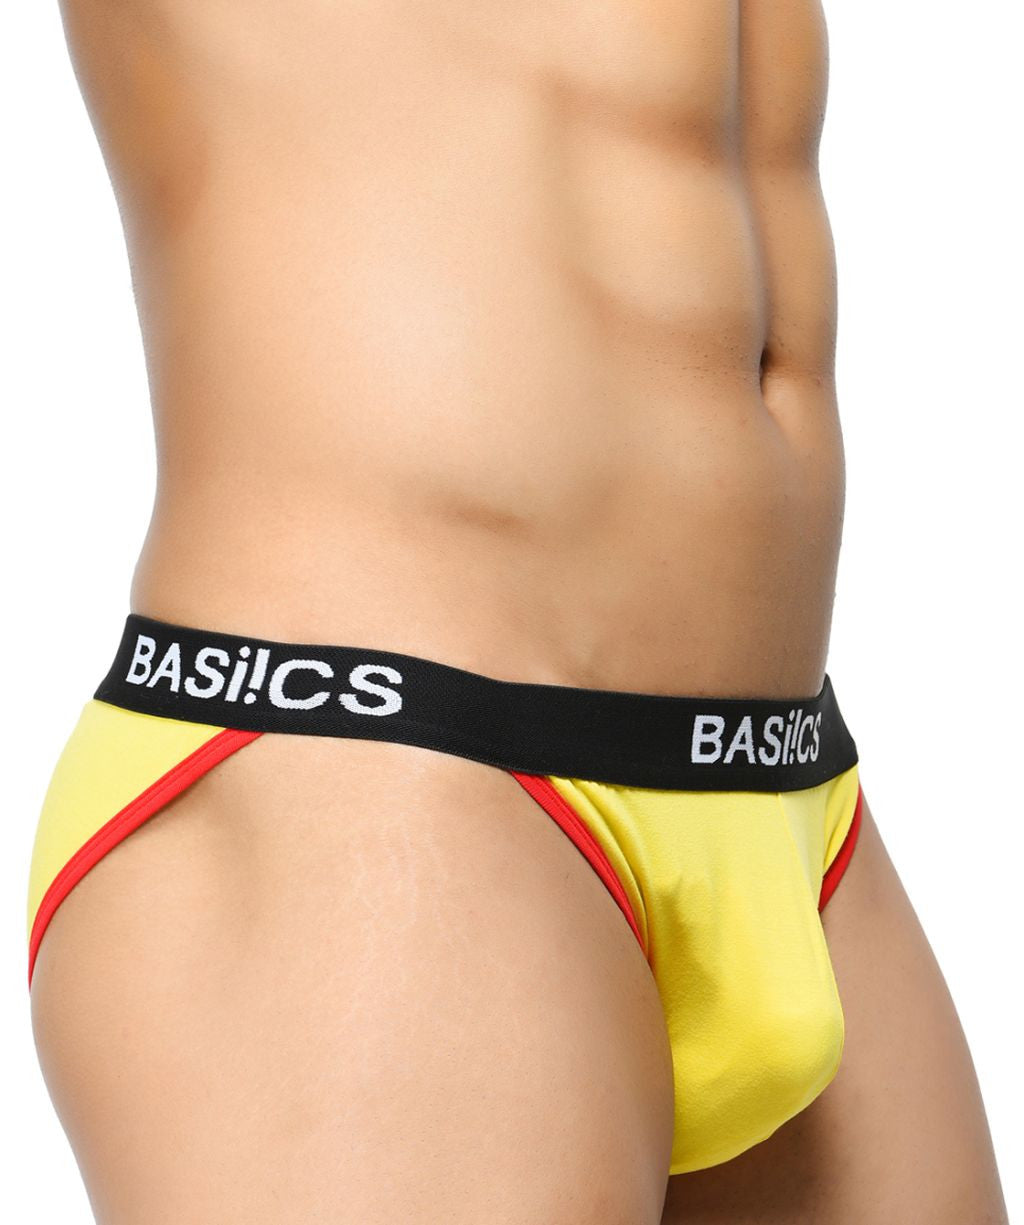 Thigh High Brief by BASIICS  Buy Men's Briefs Online in India